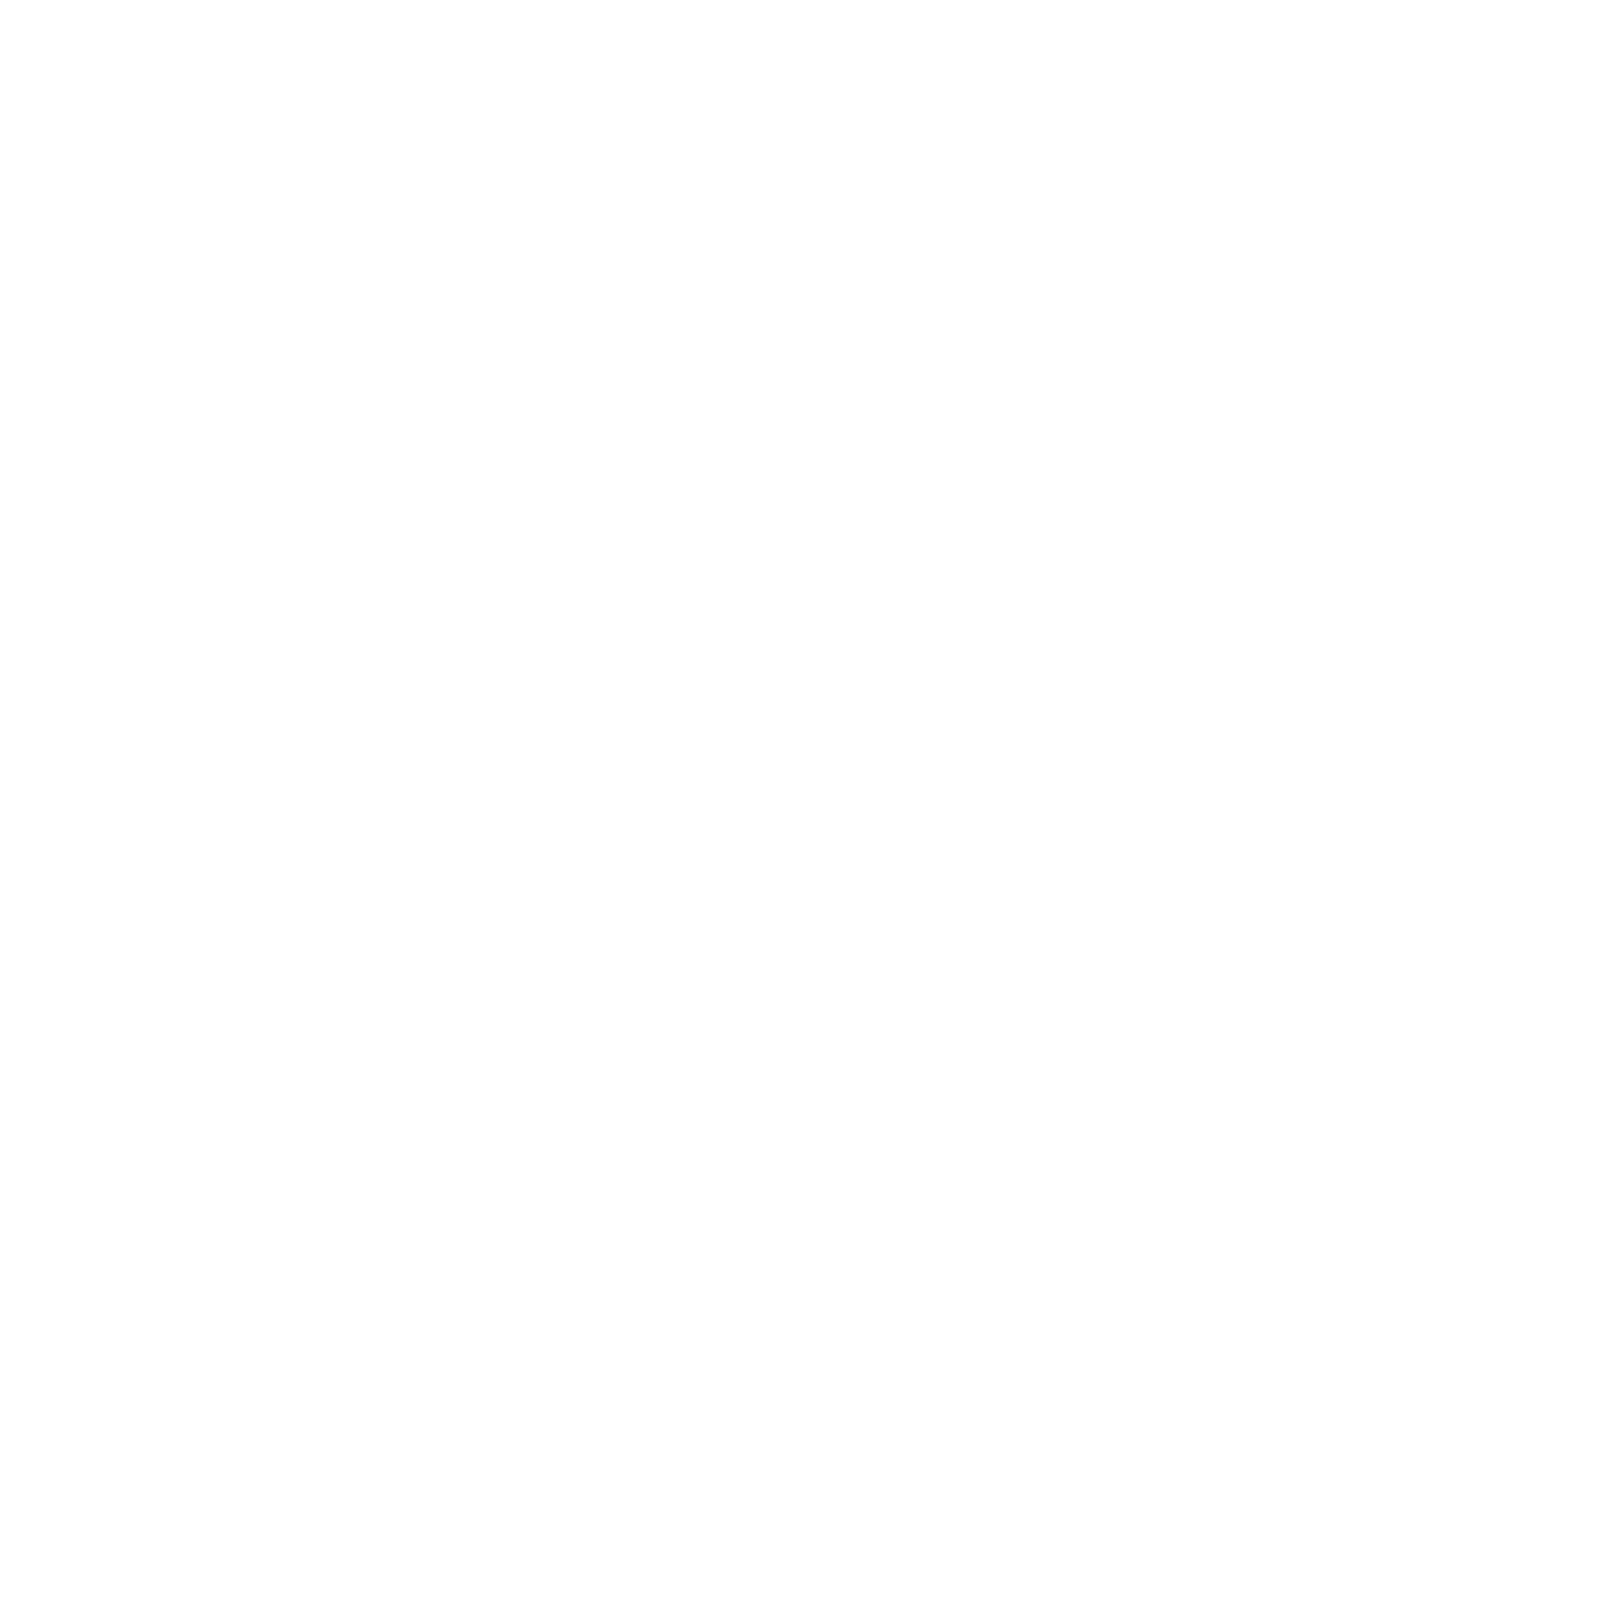 Image of a rabbit showing Envio is cruelty free